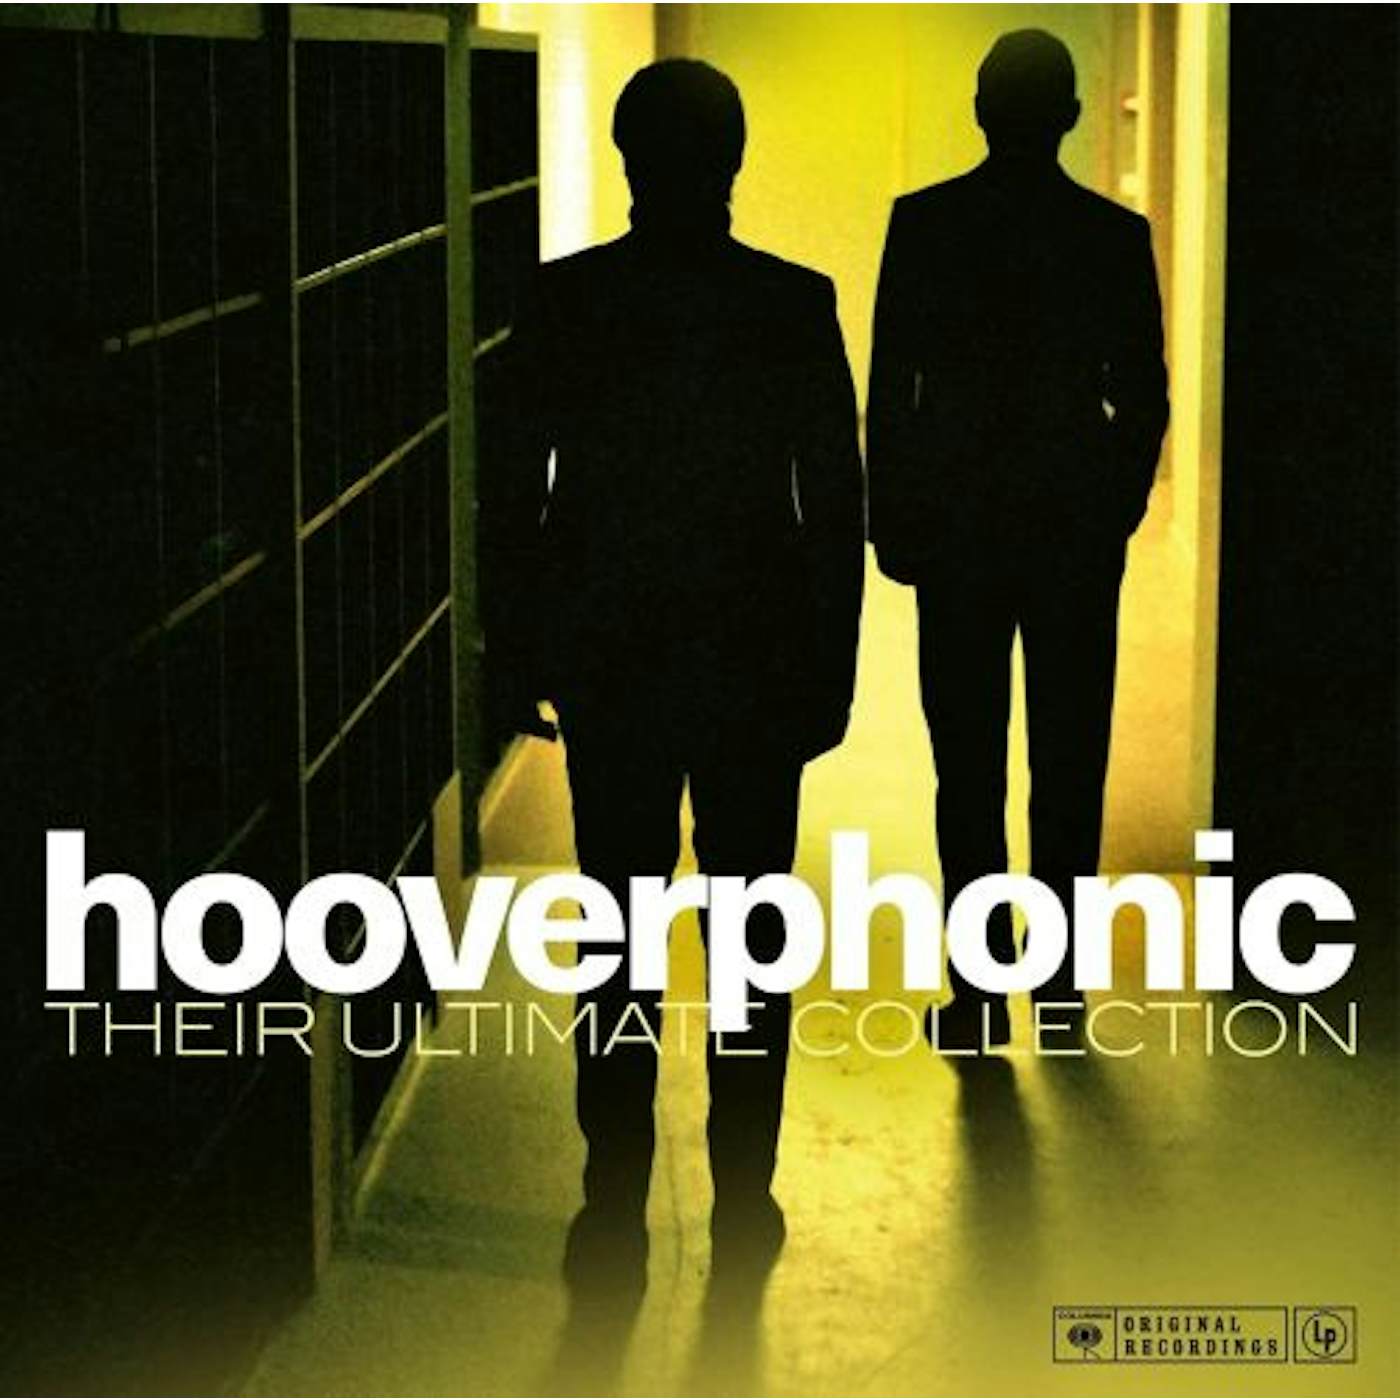 Hooverphonic THEIR ULTIMATE COLLECTION Vinyl Record